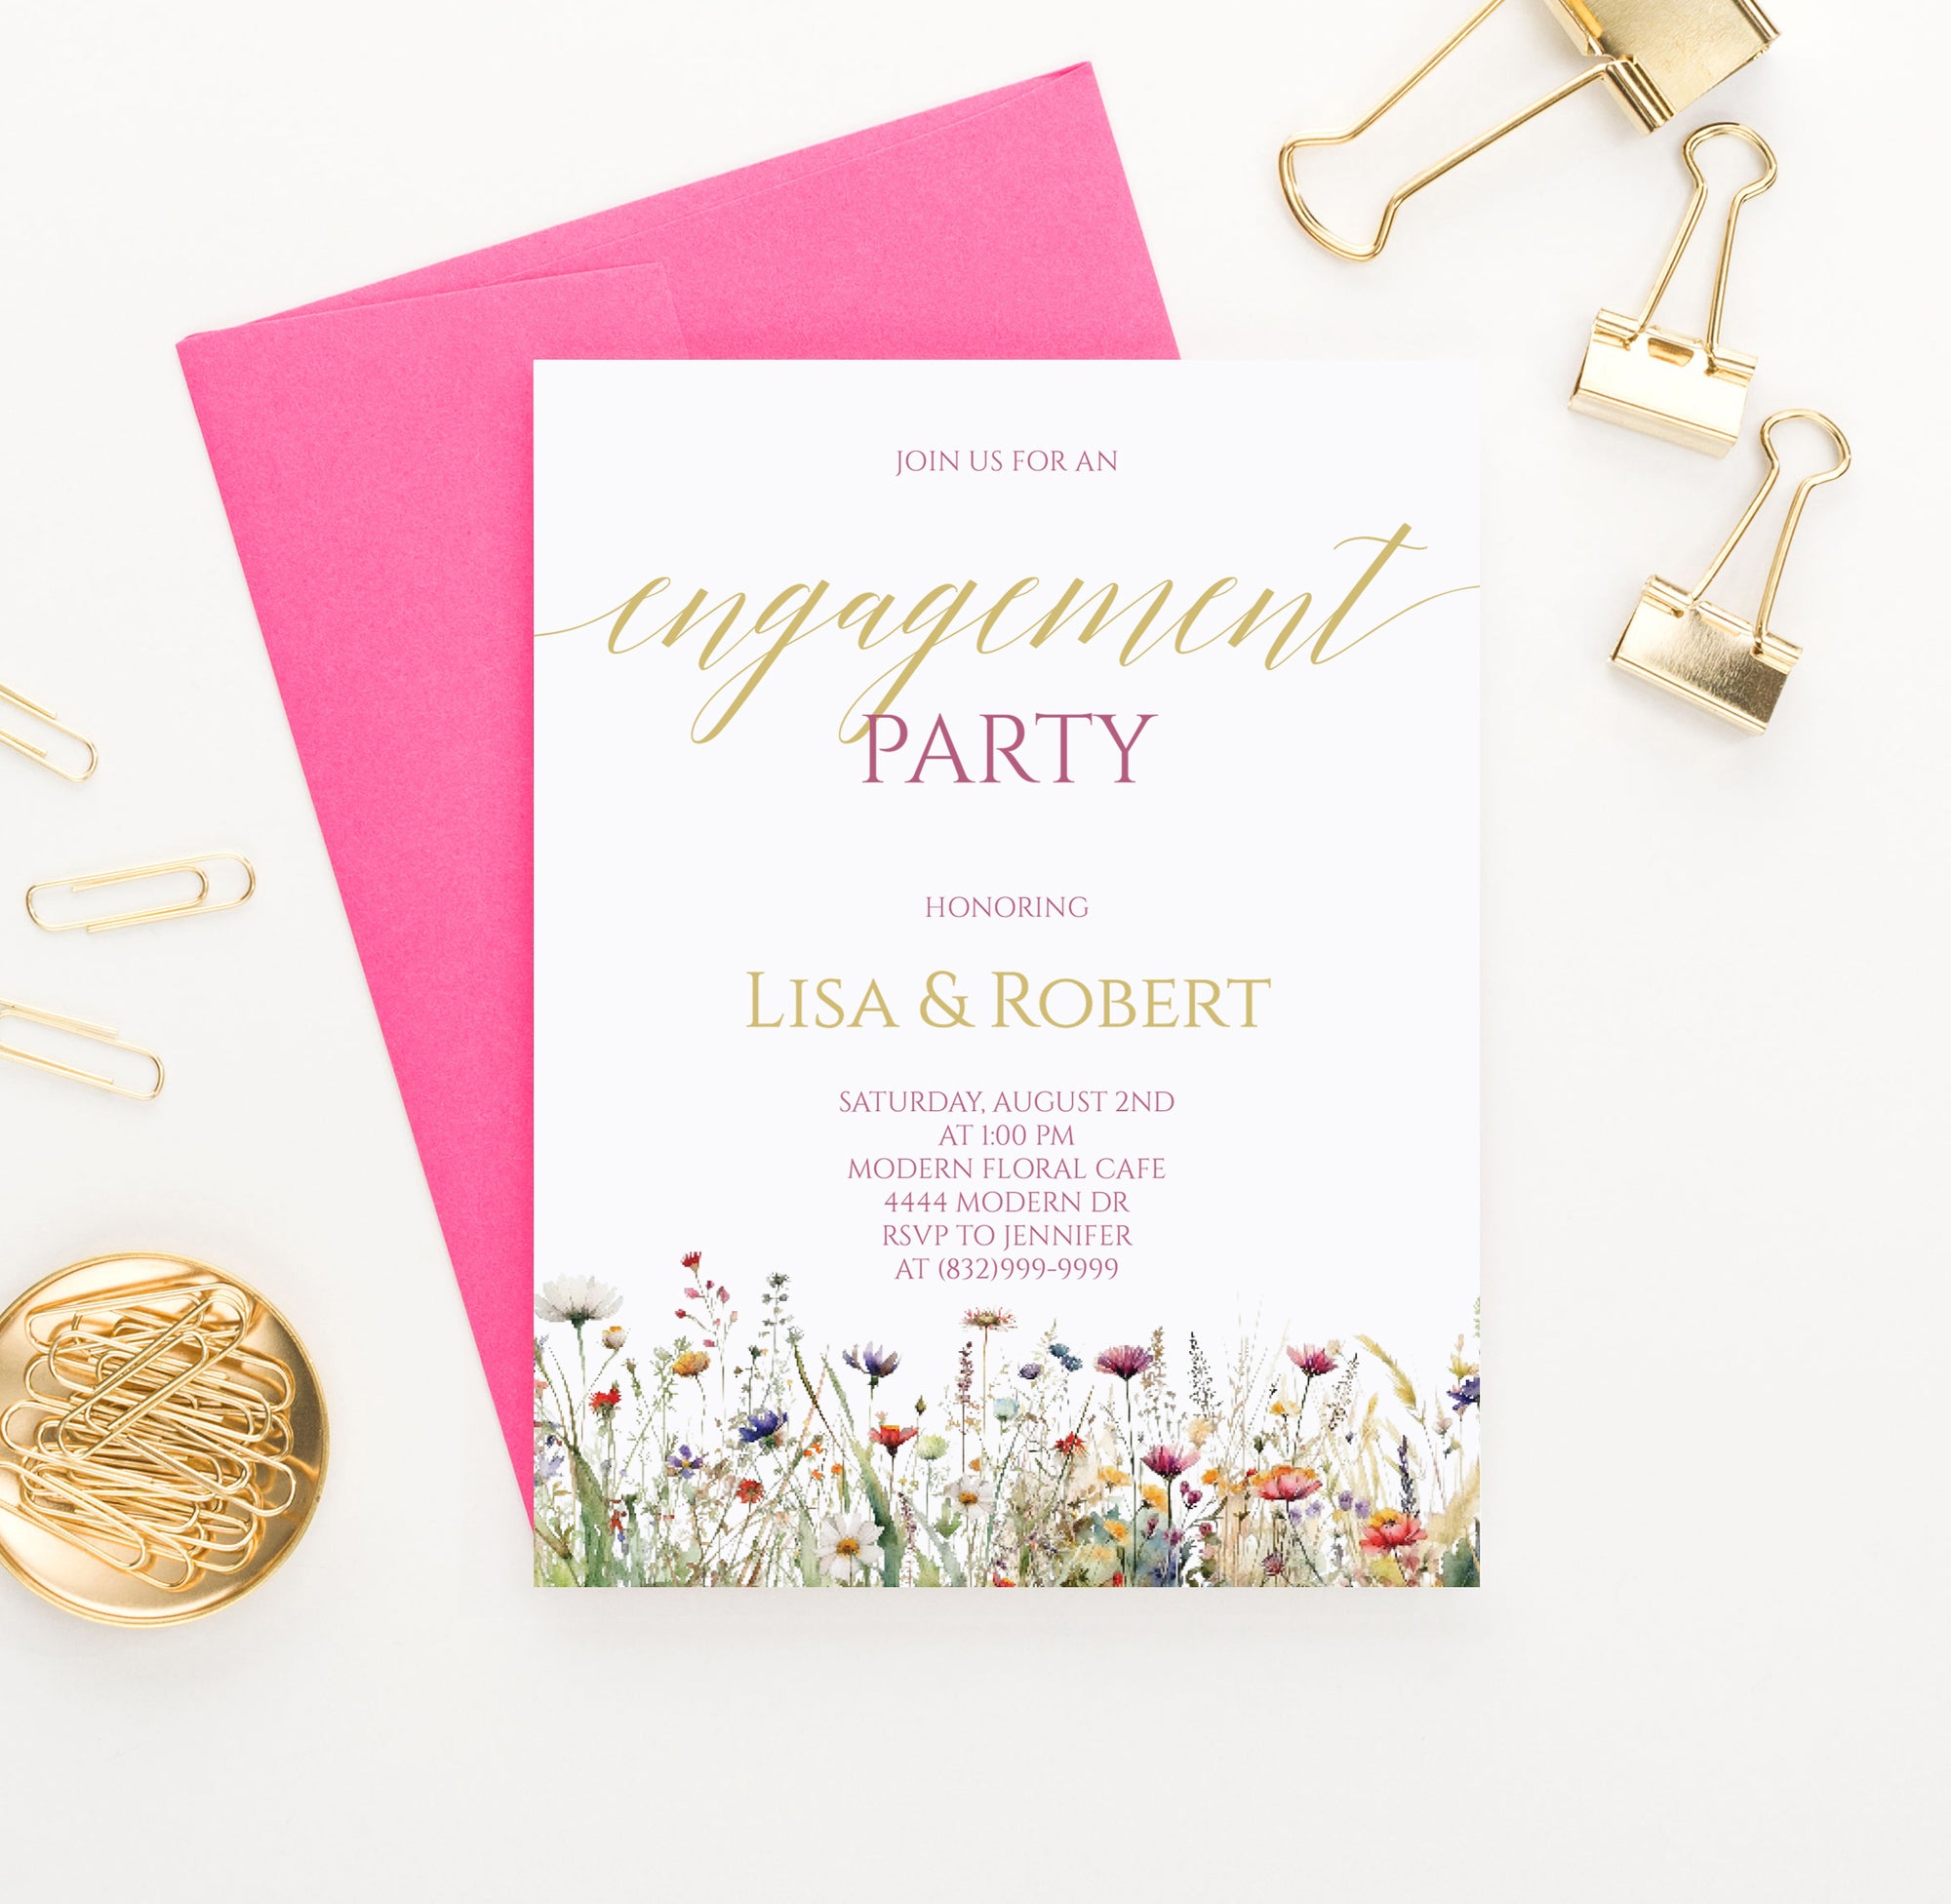 Custom Wedding Engagement Party Invitations With Wildflowers